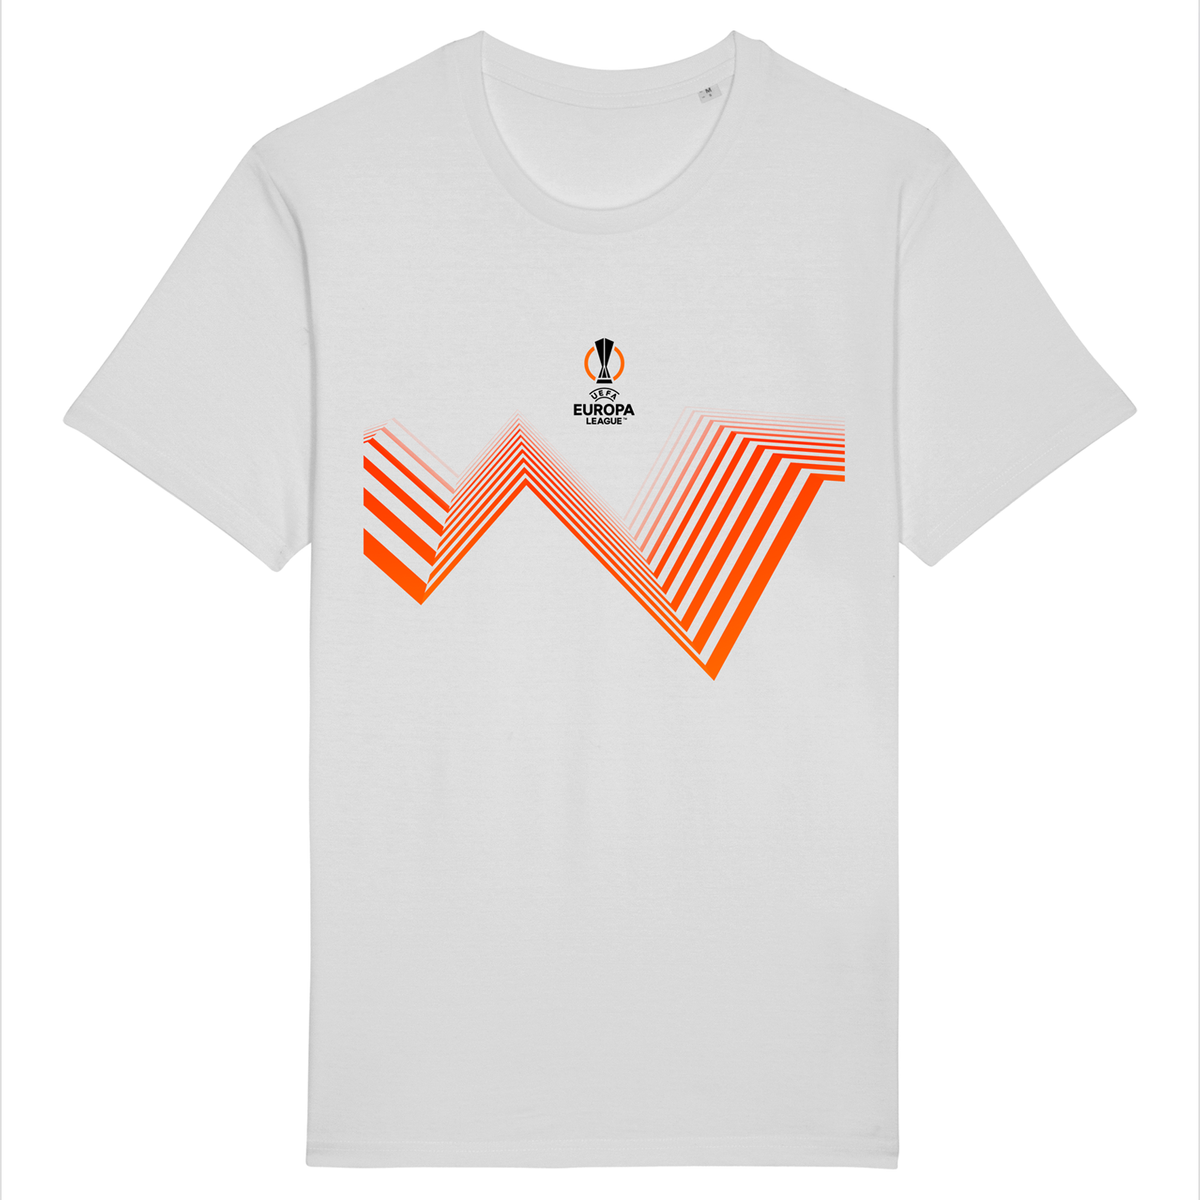 UEFA Europa League - Energy Wave White T-Shirt UEFA Club Competitions Online Store